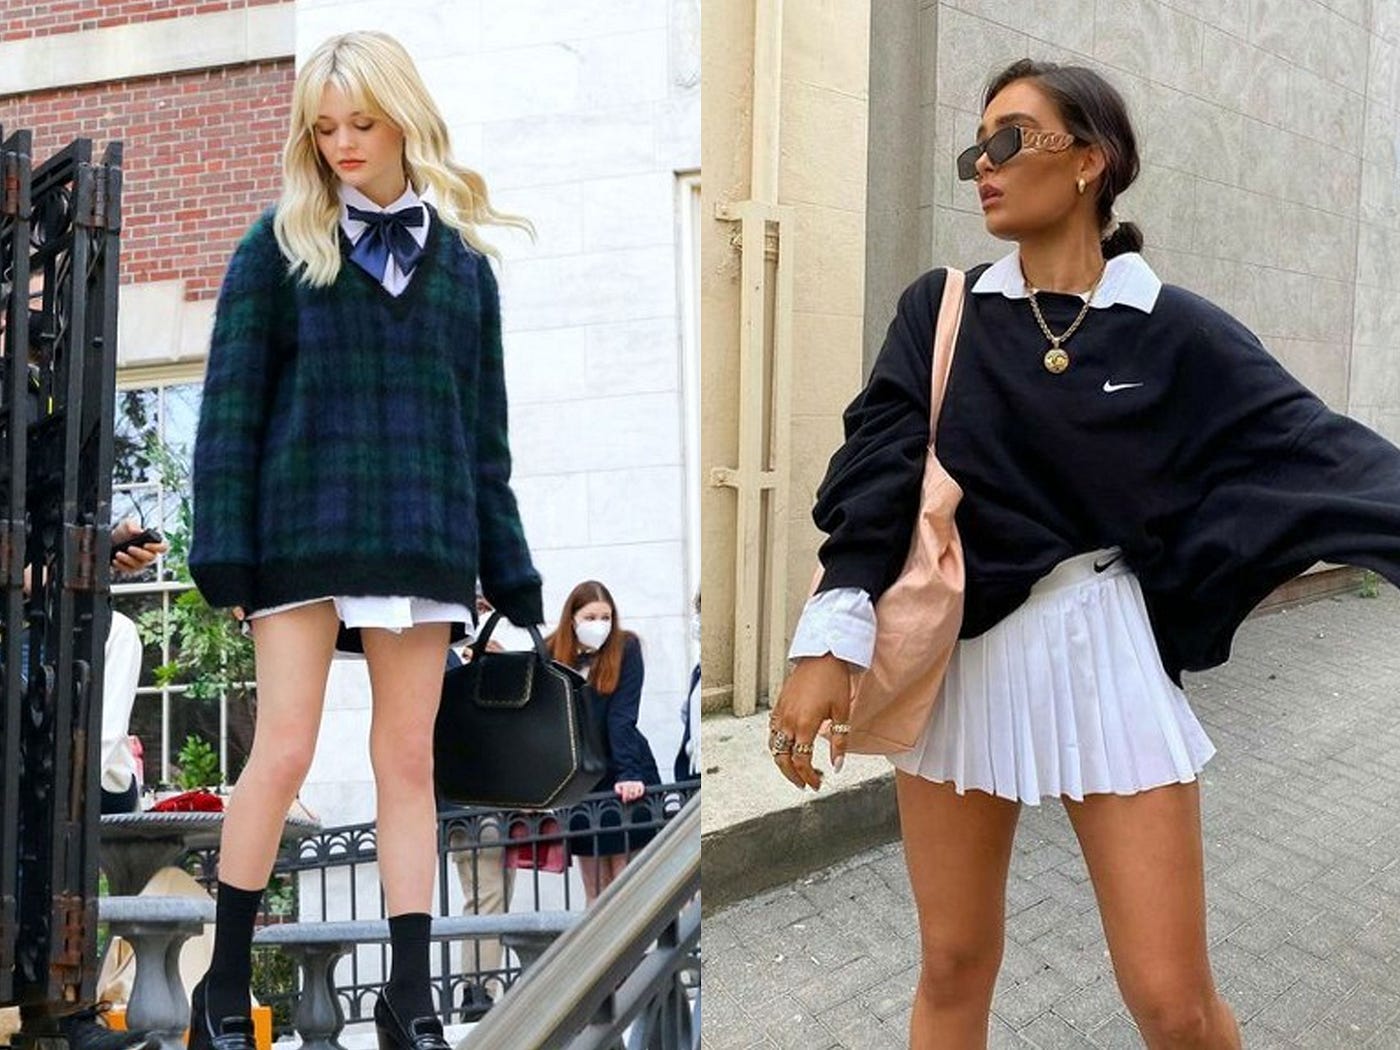 Preppy Style Is Back In 2022. Here's How to Wear It